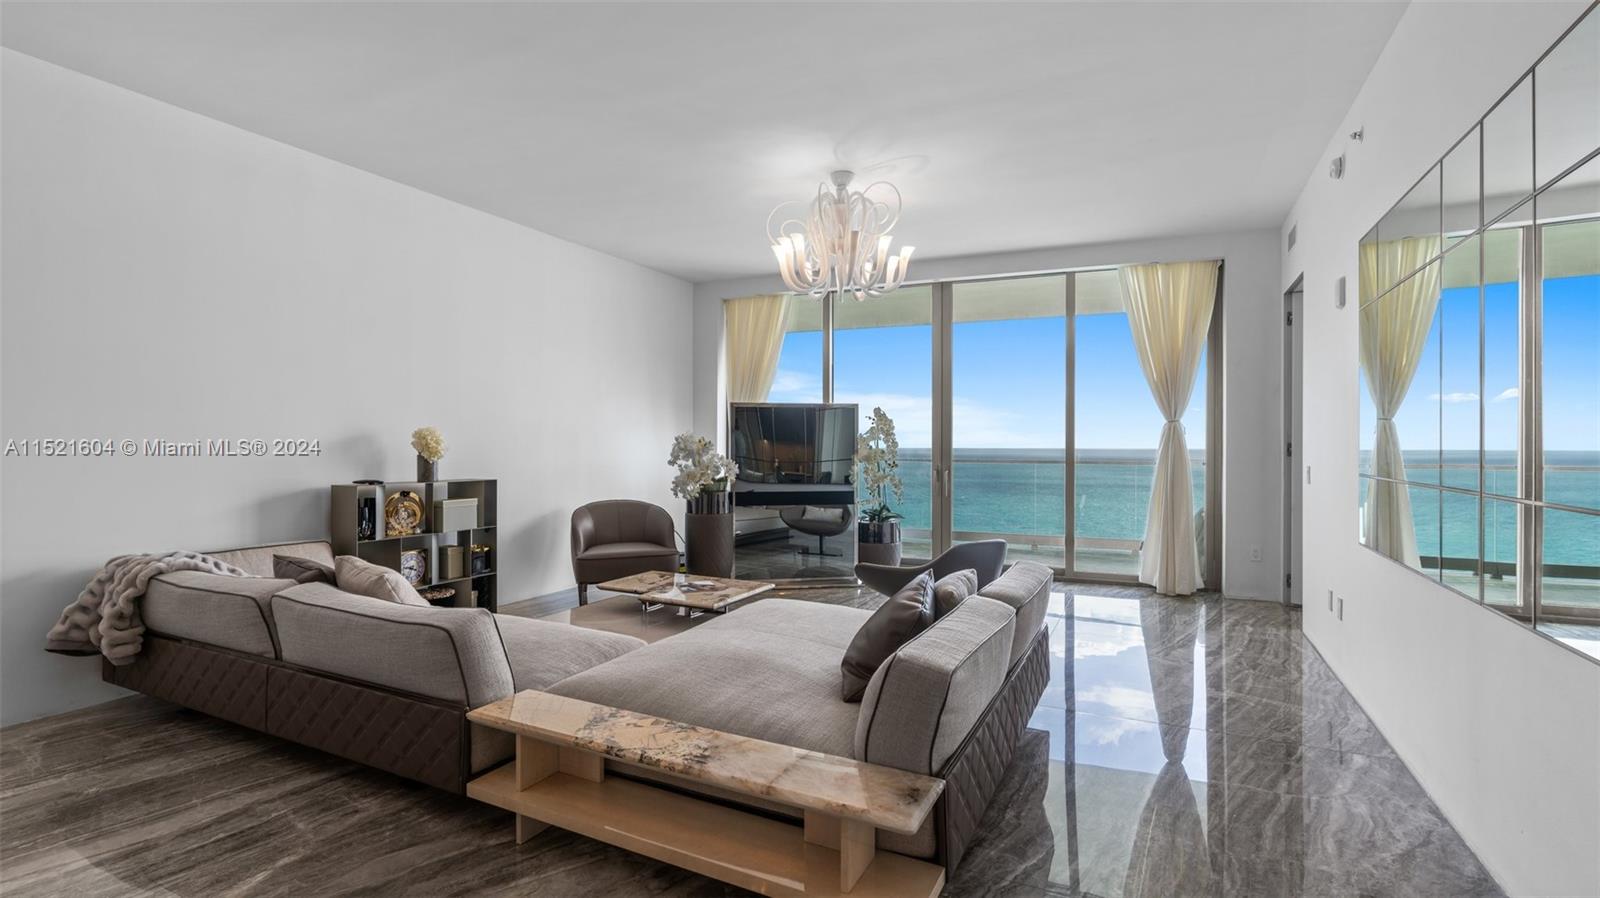 This gorgeous oceanfront condo at one of the top luxury buildings in Sunny Isles boasts more than 3000 sq ft 3 BD 5.5 BA and feels like a single family home in the sky. With private foyer & elevator, bright open east to west flow thru floor plan, top quality finishes, 10 ft ceilings, 2 X-large balconies, offering the most magnificent views of the ocean, bay & the intracoastal. Top of the line Italian custom built-in closets, high-end Italian porcelain floors, custom-made window treatments, high impact windows, ultra modern kitchen w/European-design cabinetry, Wolf appliances, Sub Zero refrigerator & wine cooler. 35,000 Sq. Ft of luxury amenities: Oceanfront Resort Style Pool, Bar, State-of-the-art Fitness Center, 2-story Spa, children's play room, cigar lounge. Best schools.